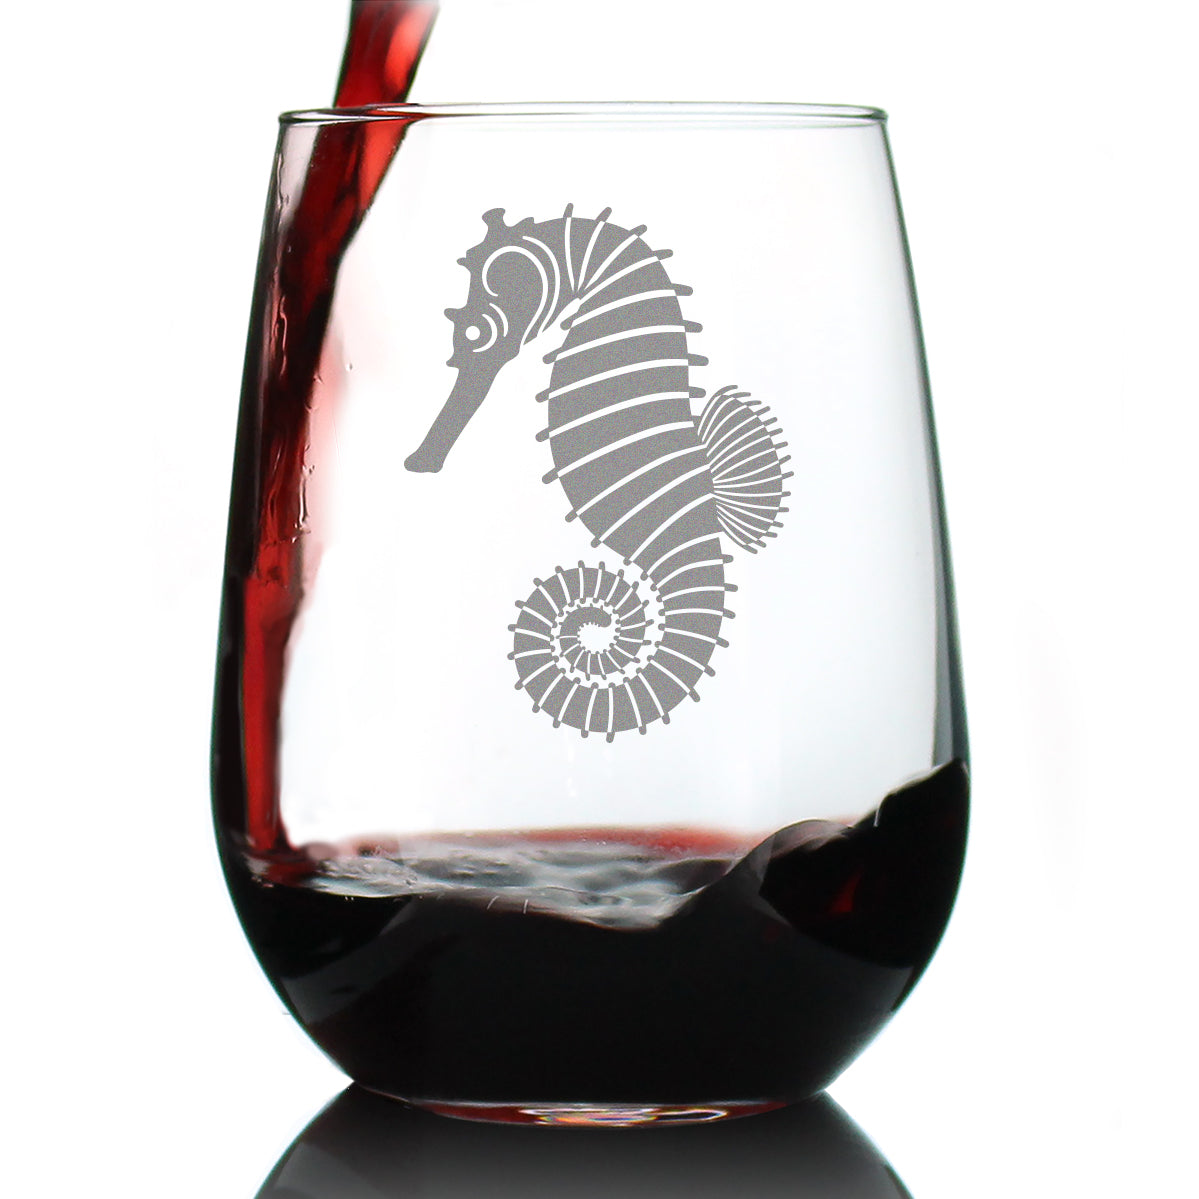 Seahorse Stemless Wine Glass - Unique Beachy Summer Gifts and Beach House Decor - Large 17 Oz Glasses